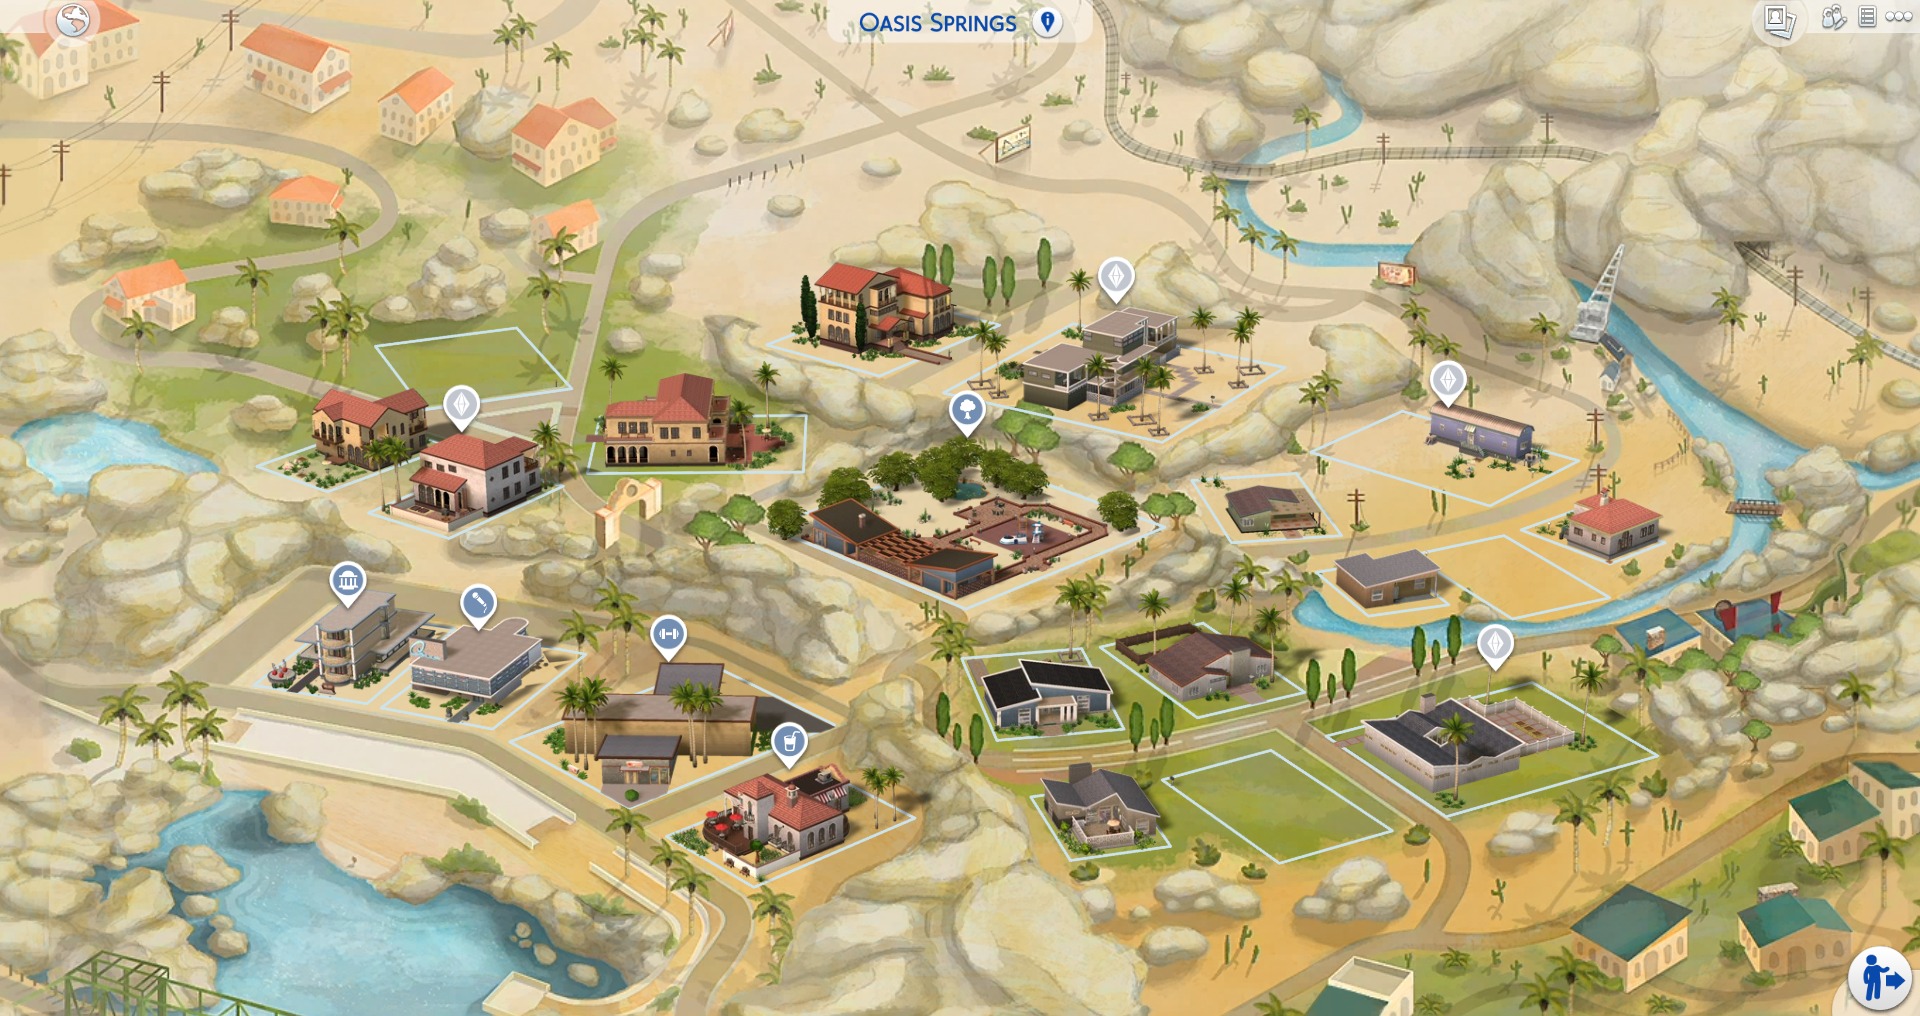 Download These Beautiful World Map Replacements for The Sims 4 | SimsVIP